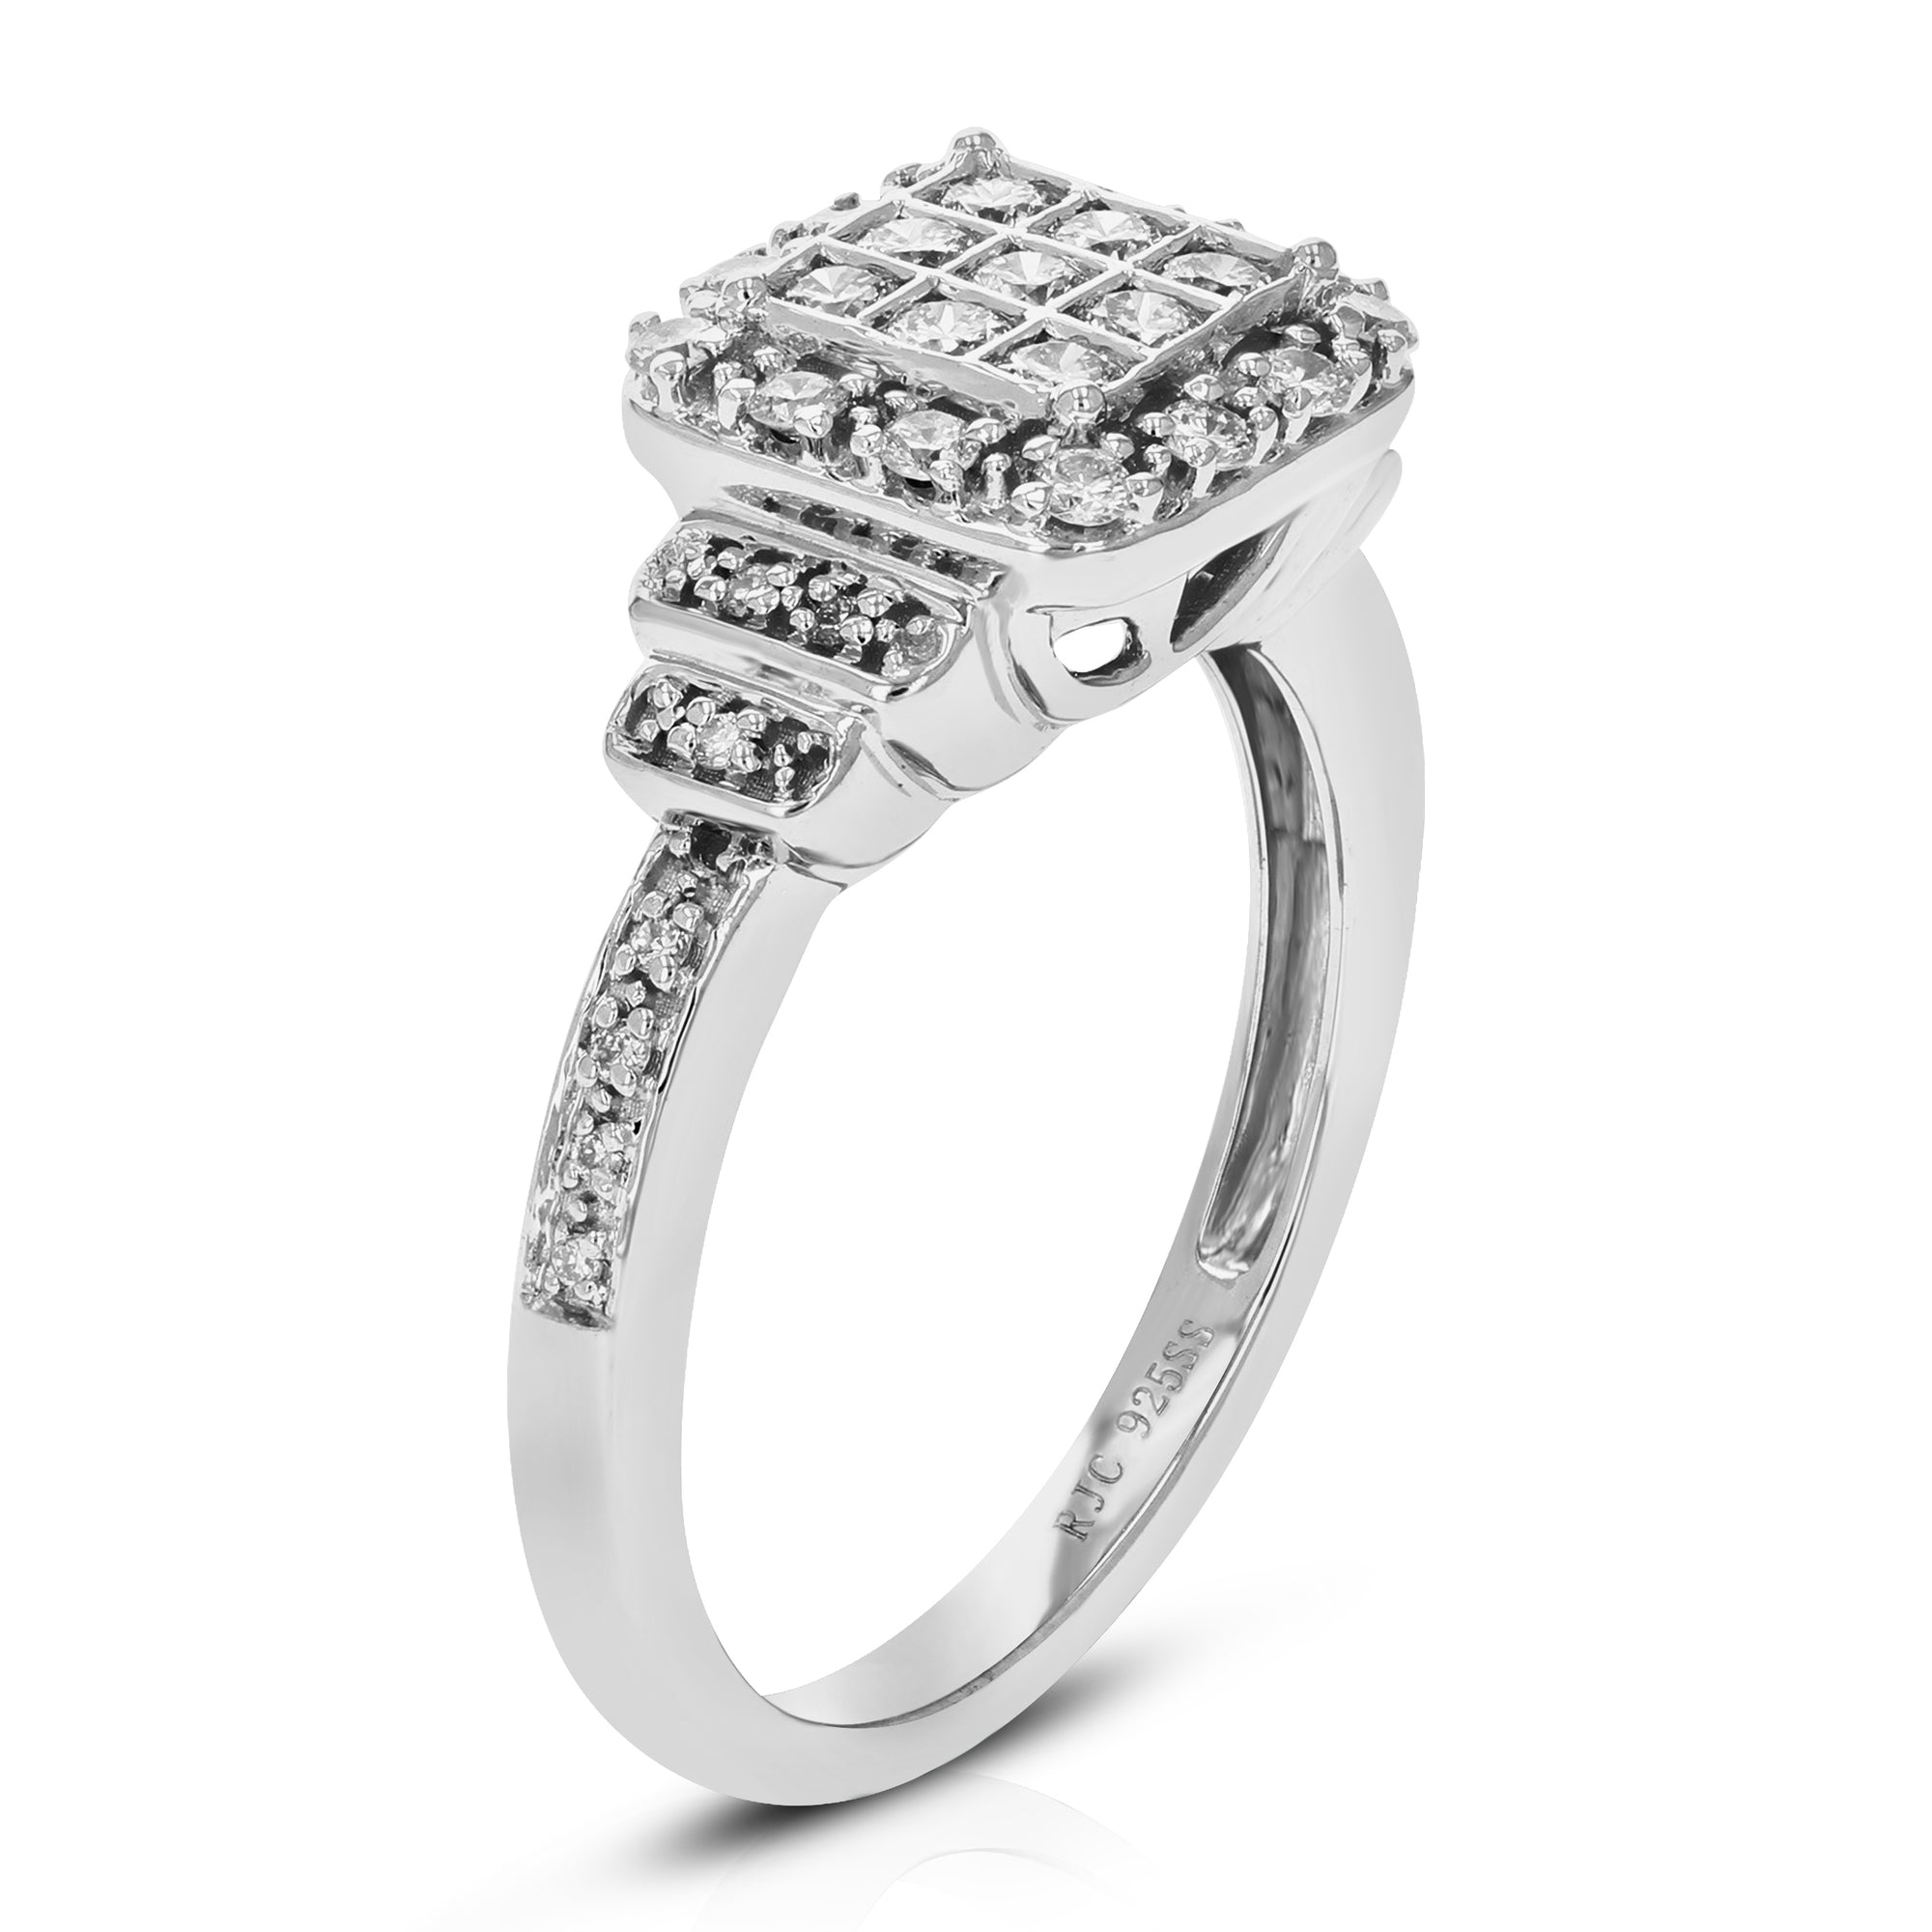 1/2 cttw Round Cut Lab Grown Diamond Engagement Ring 35 Stones .925 Sterling Silver Prong Set